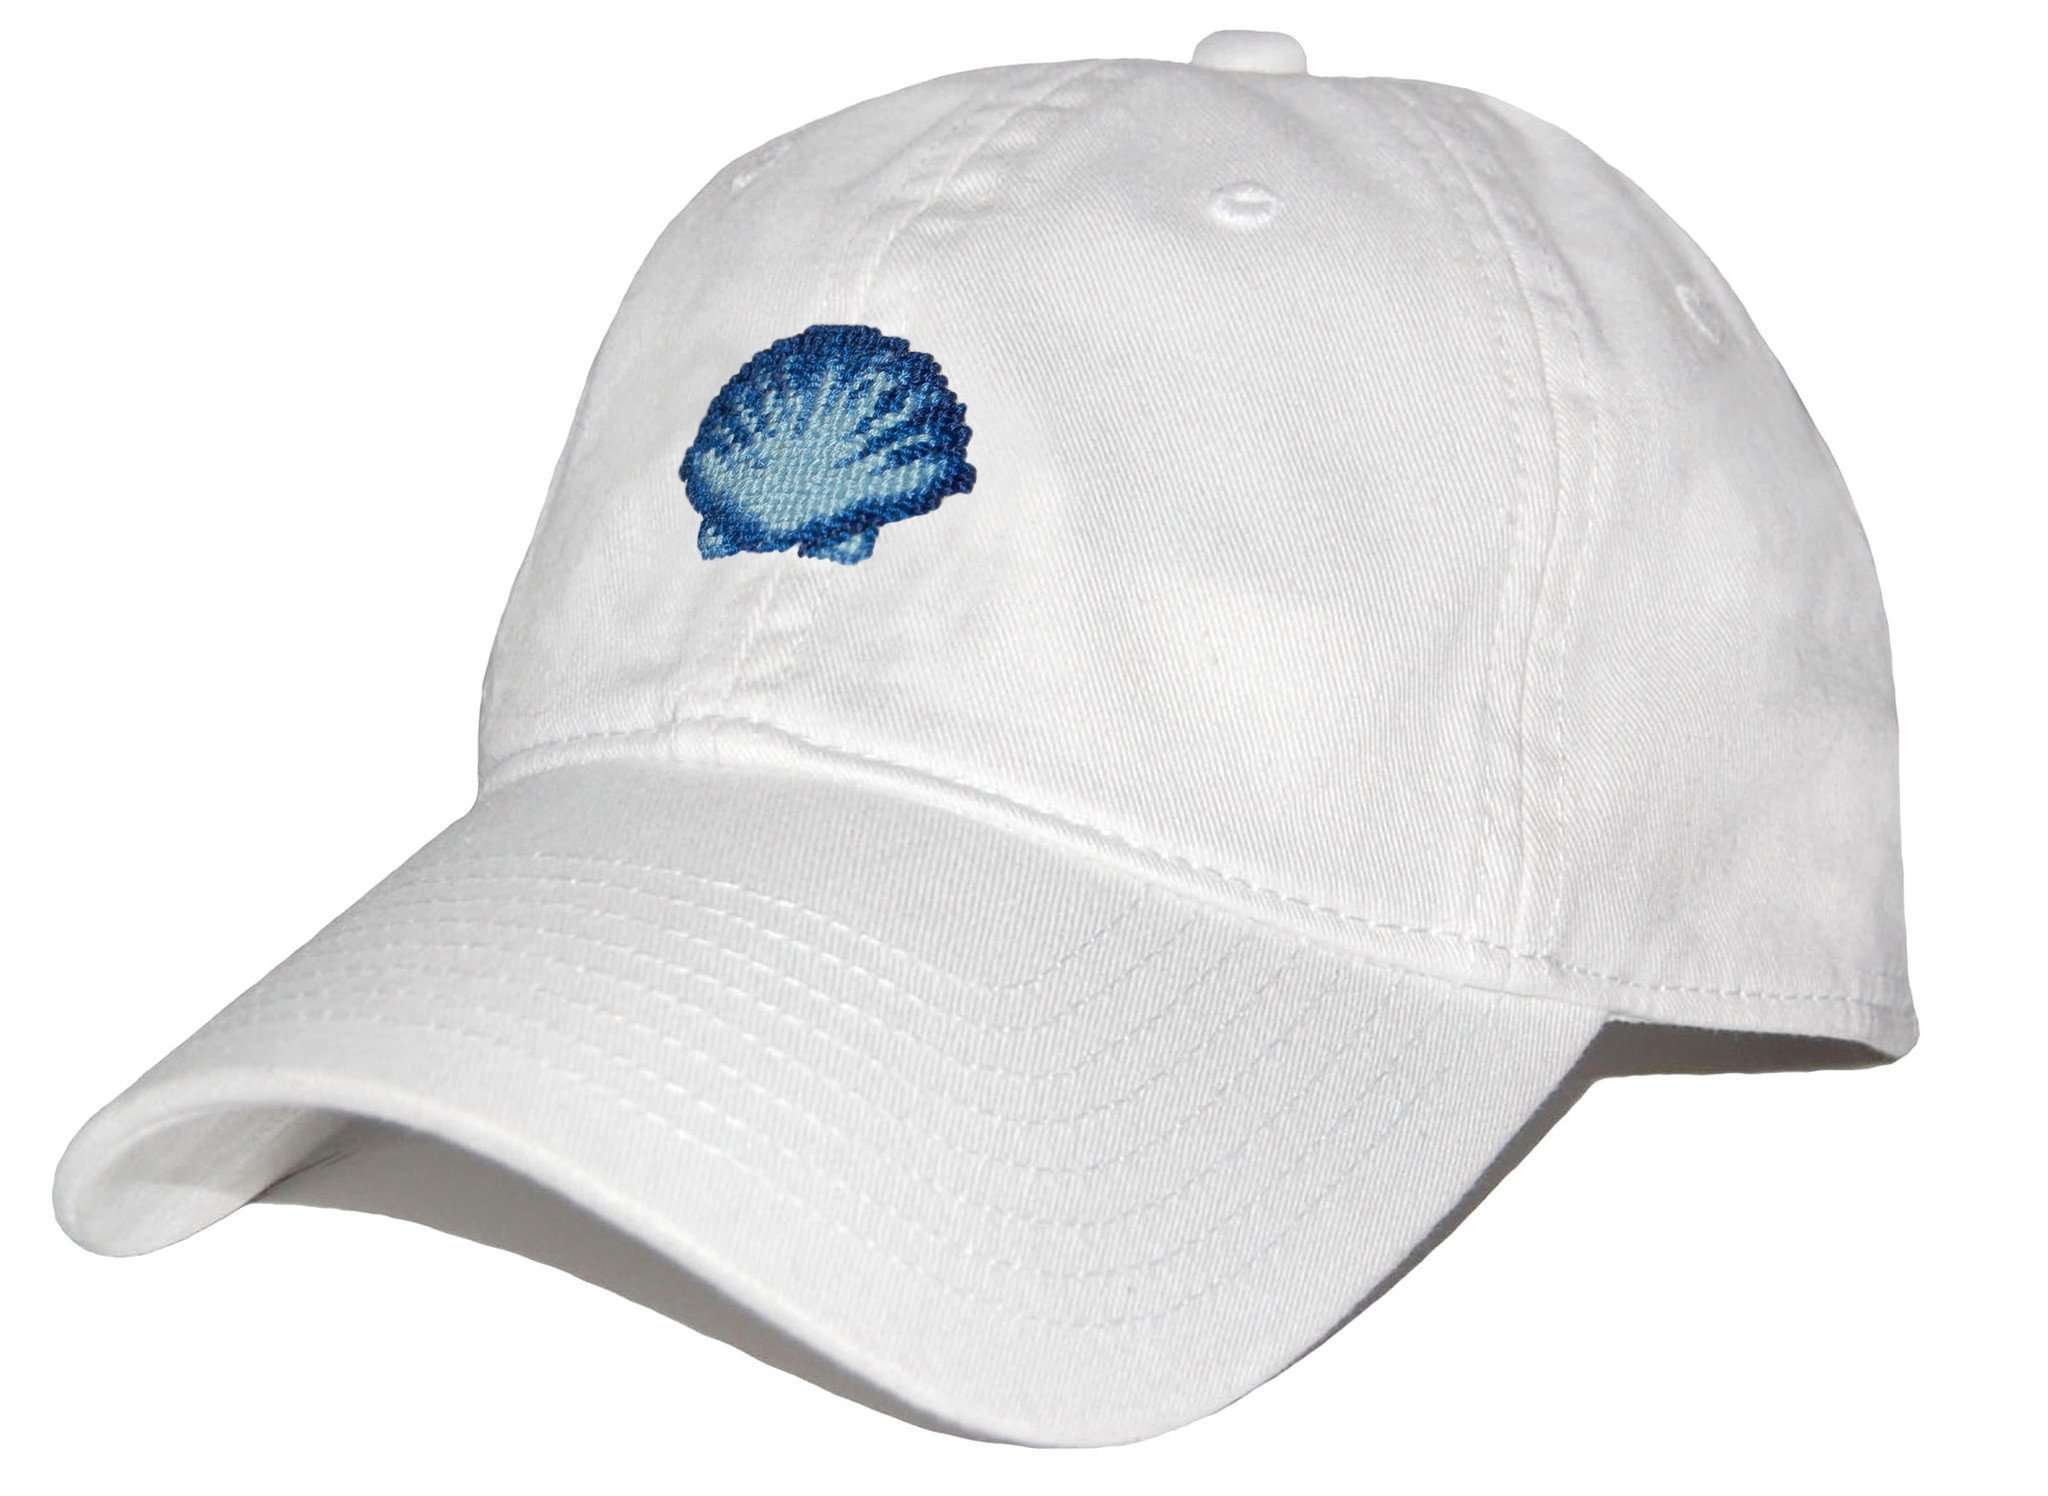 Scallop Shell Needlepoint Hat in White by Smathers & Branson - Country Club Prep